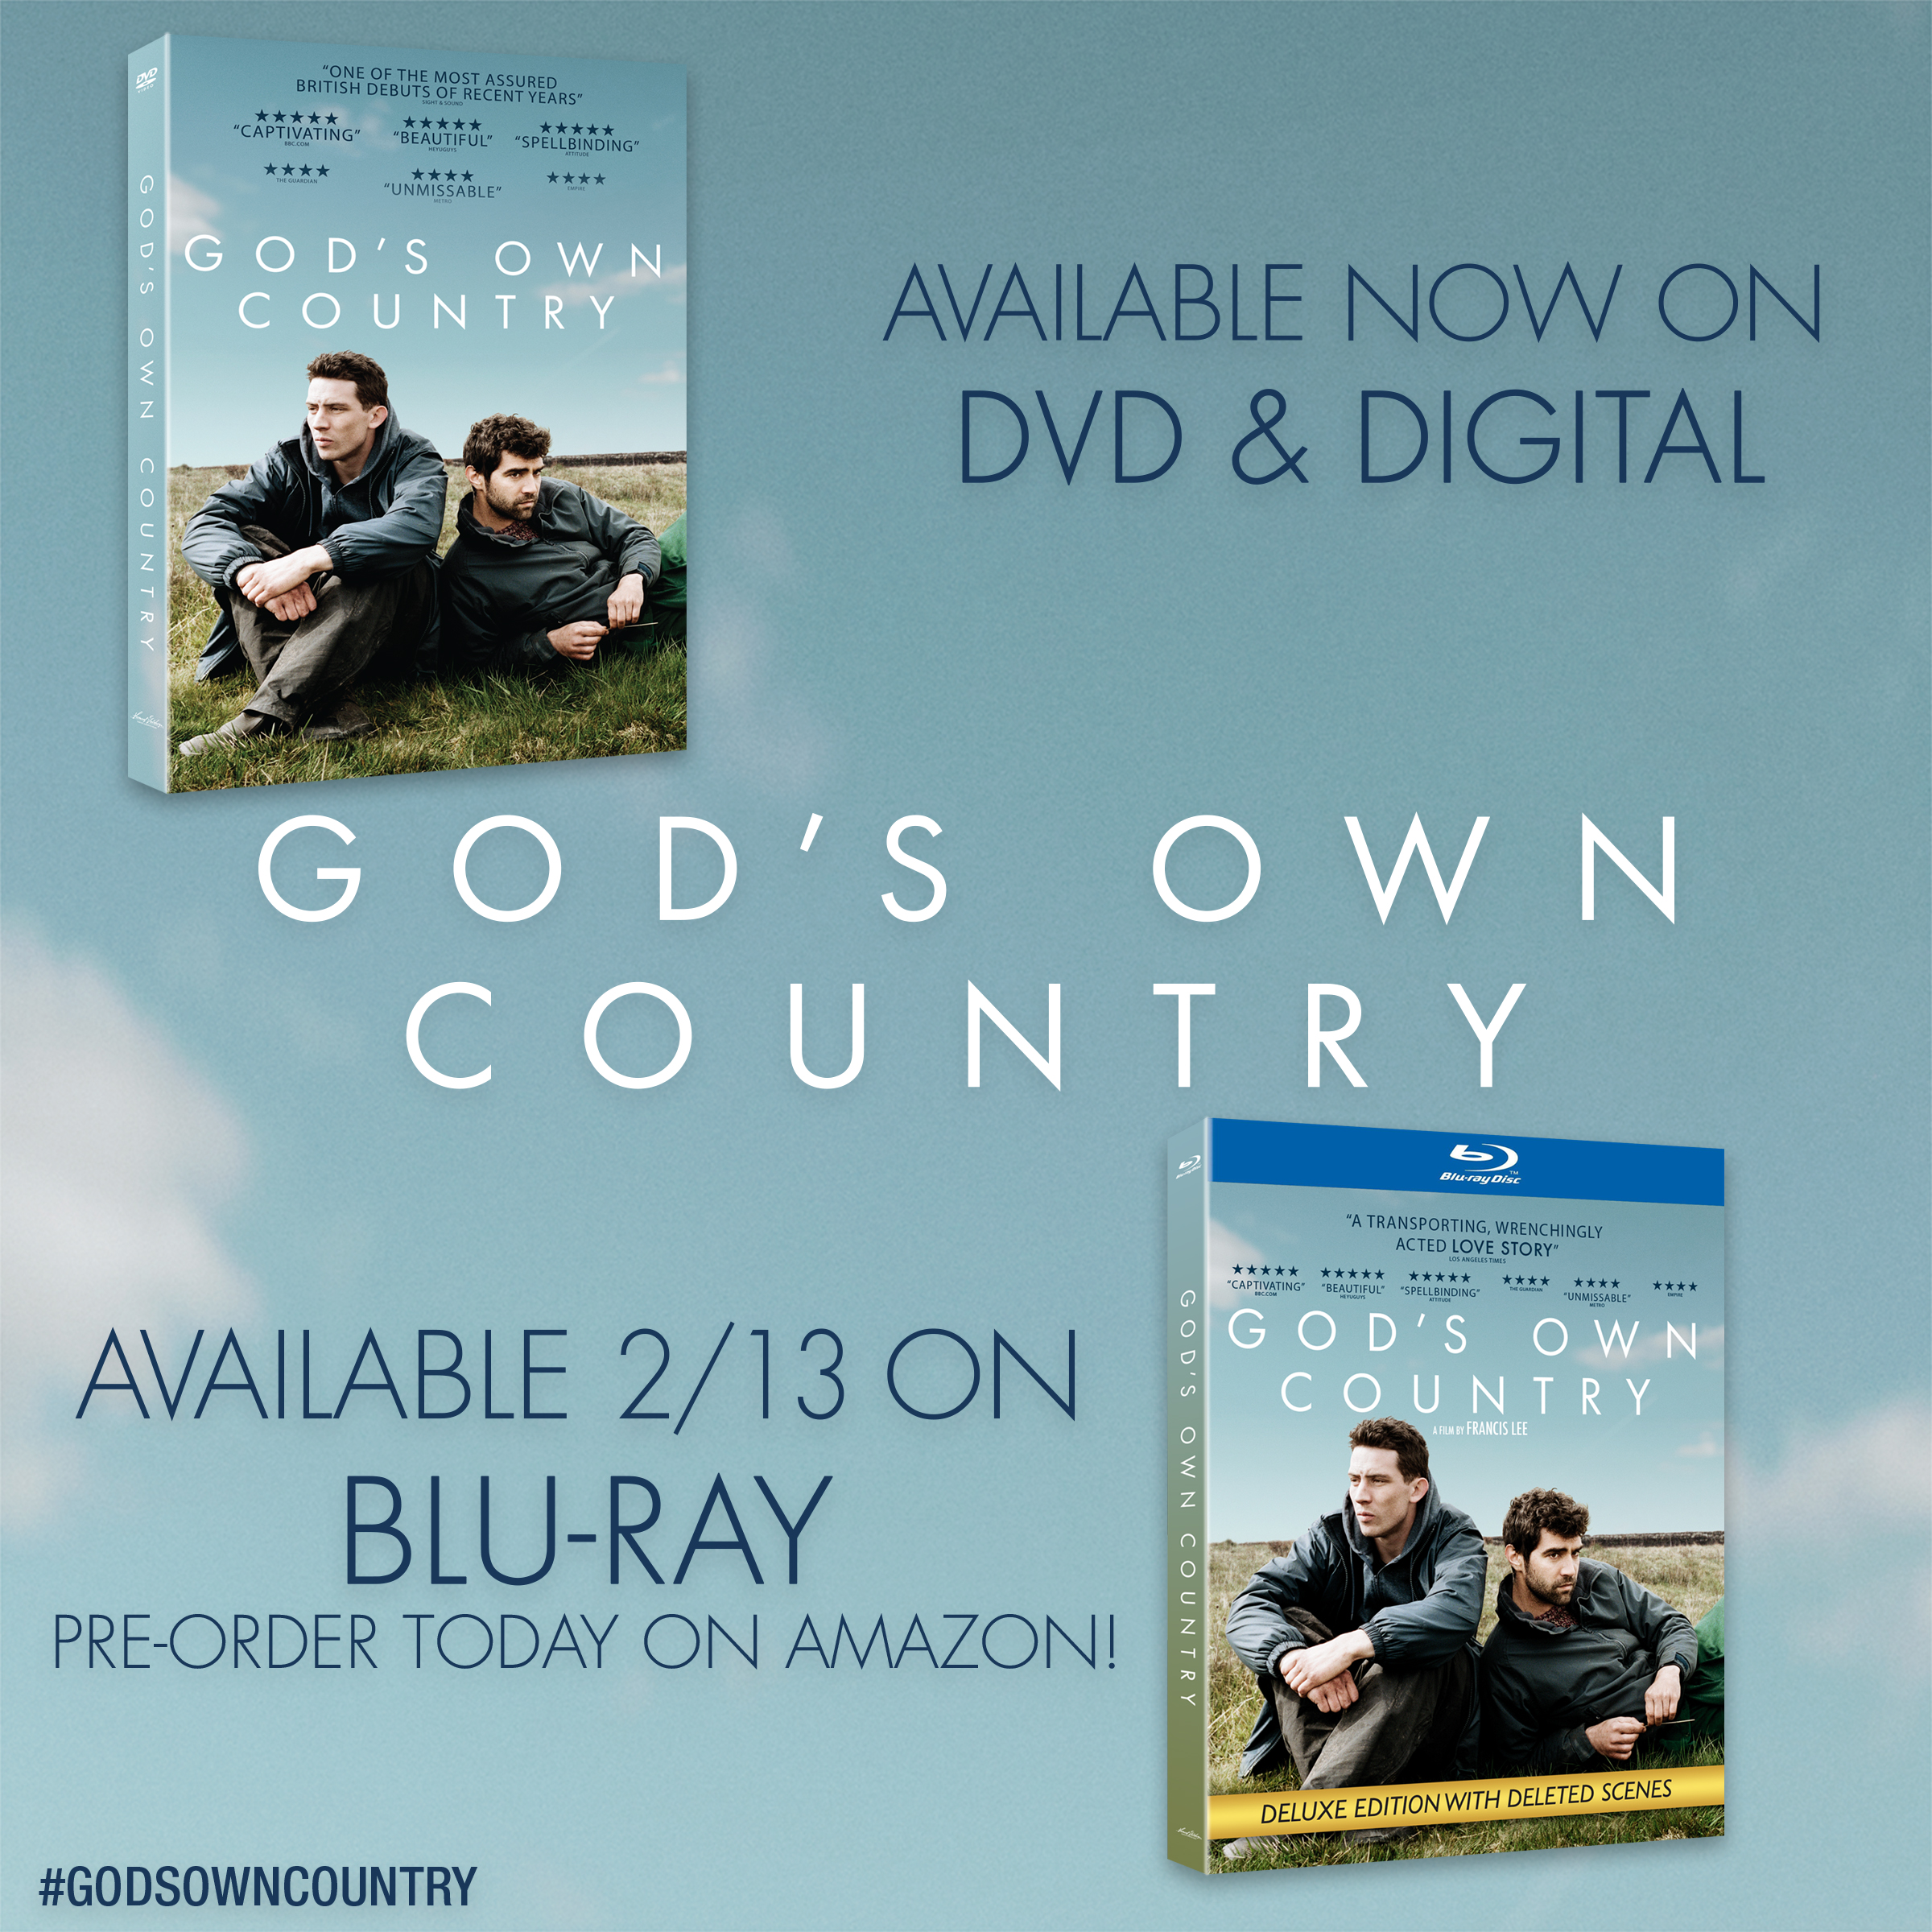 GOD'S OWN COUNTRY is NOW AVAILABLE